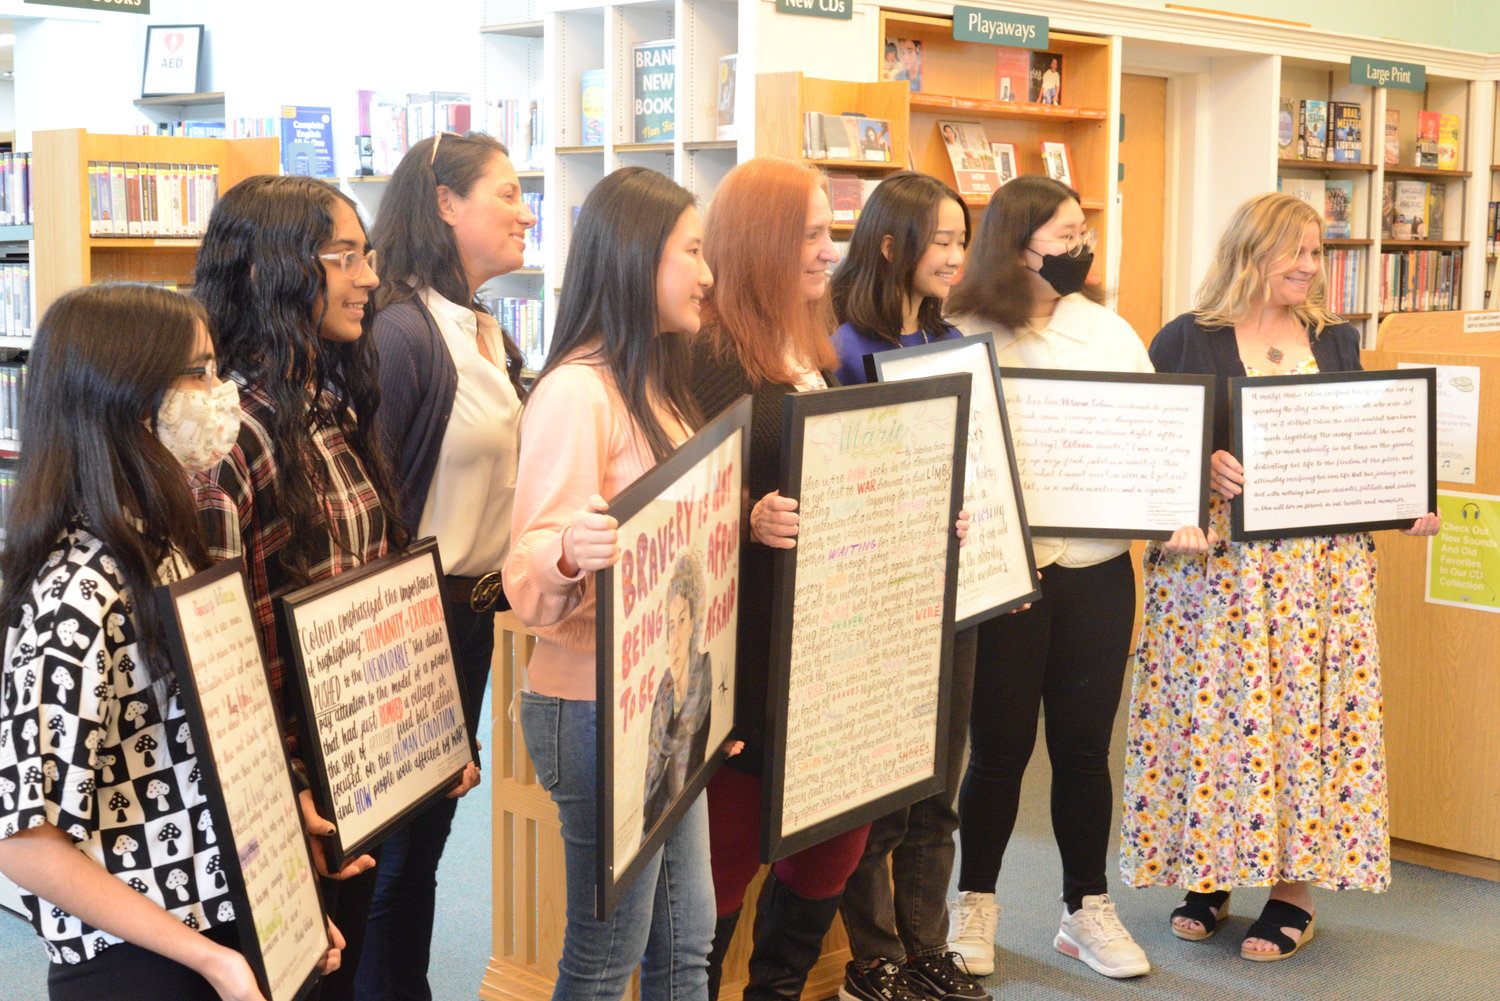 Members of Girl Pride International with their contributions to the Marie Colvin Art Exhibit at the Oyster Bay-East Norwich Library on March 25, when they were recognized for their participation.